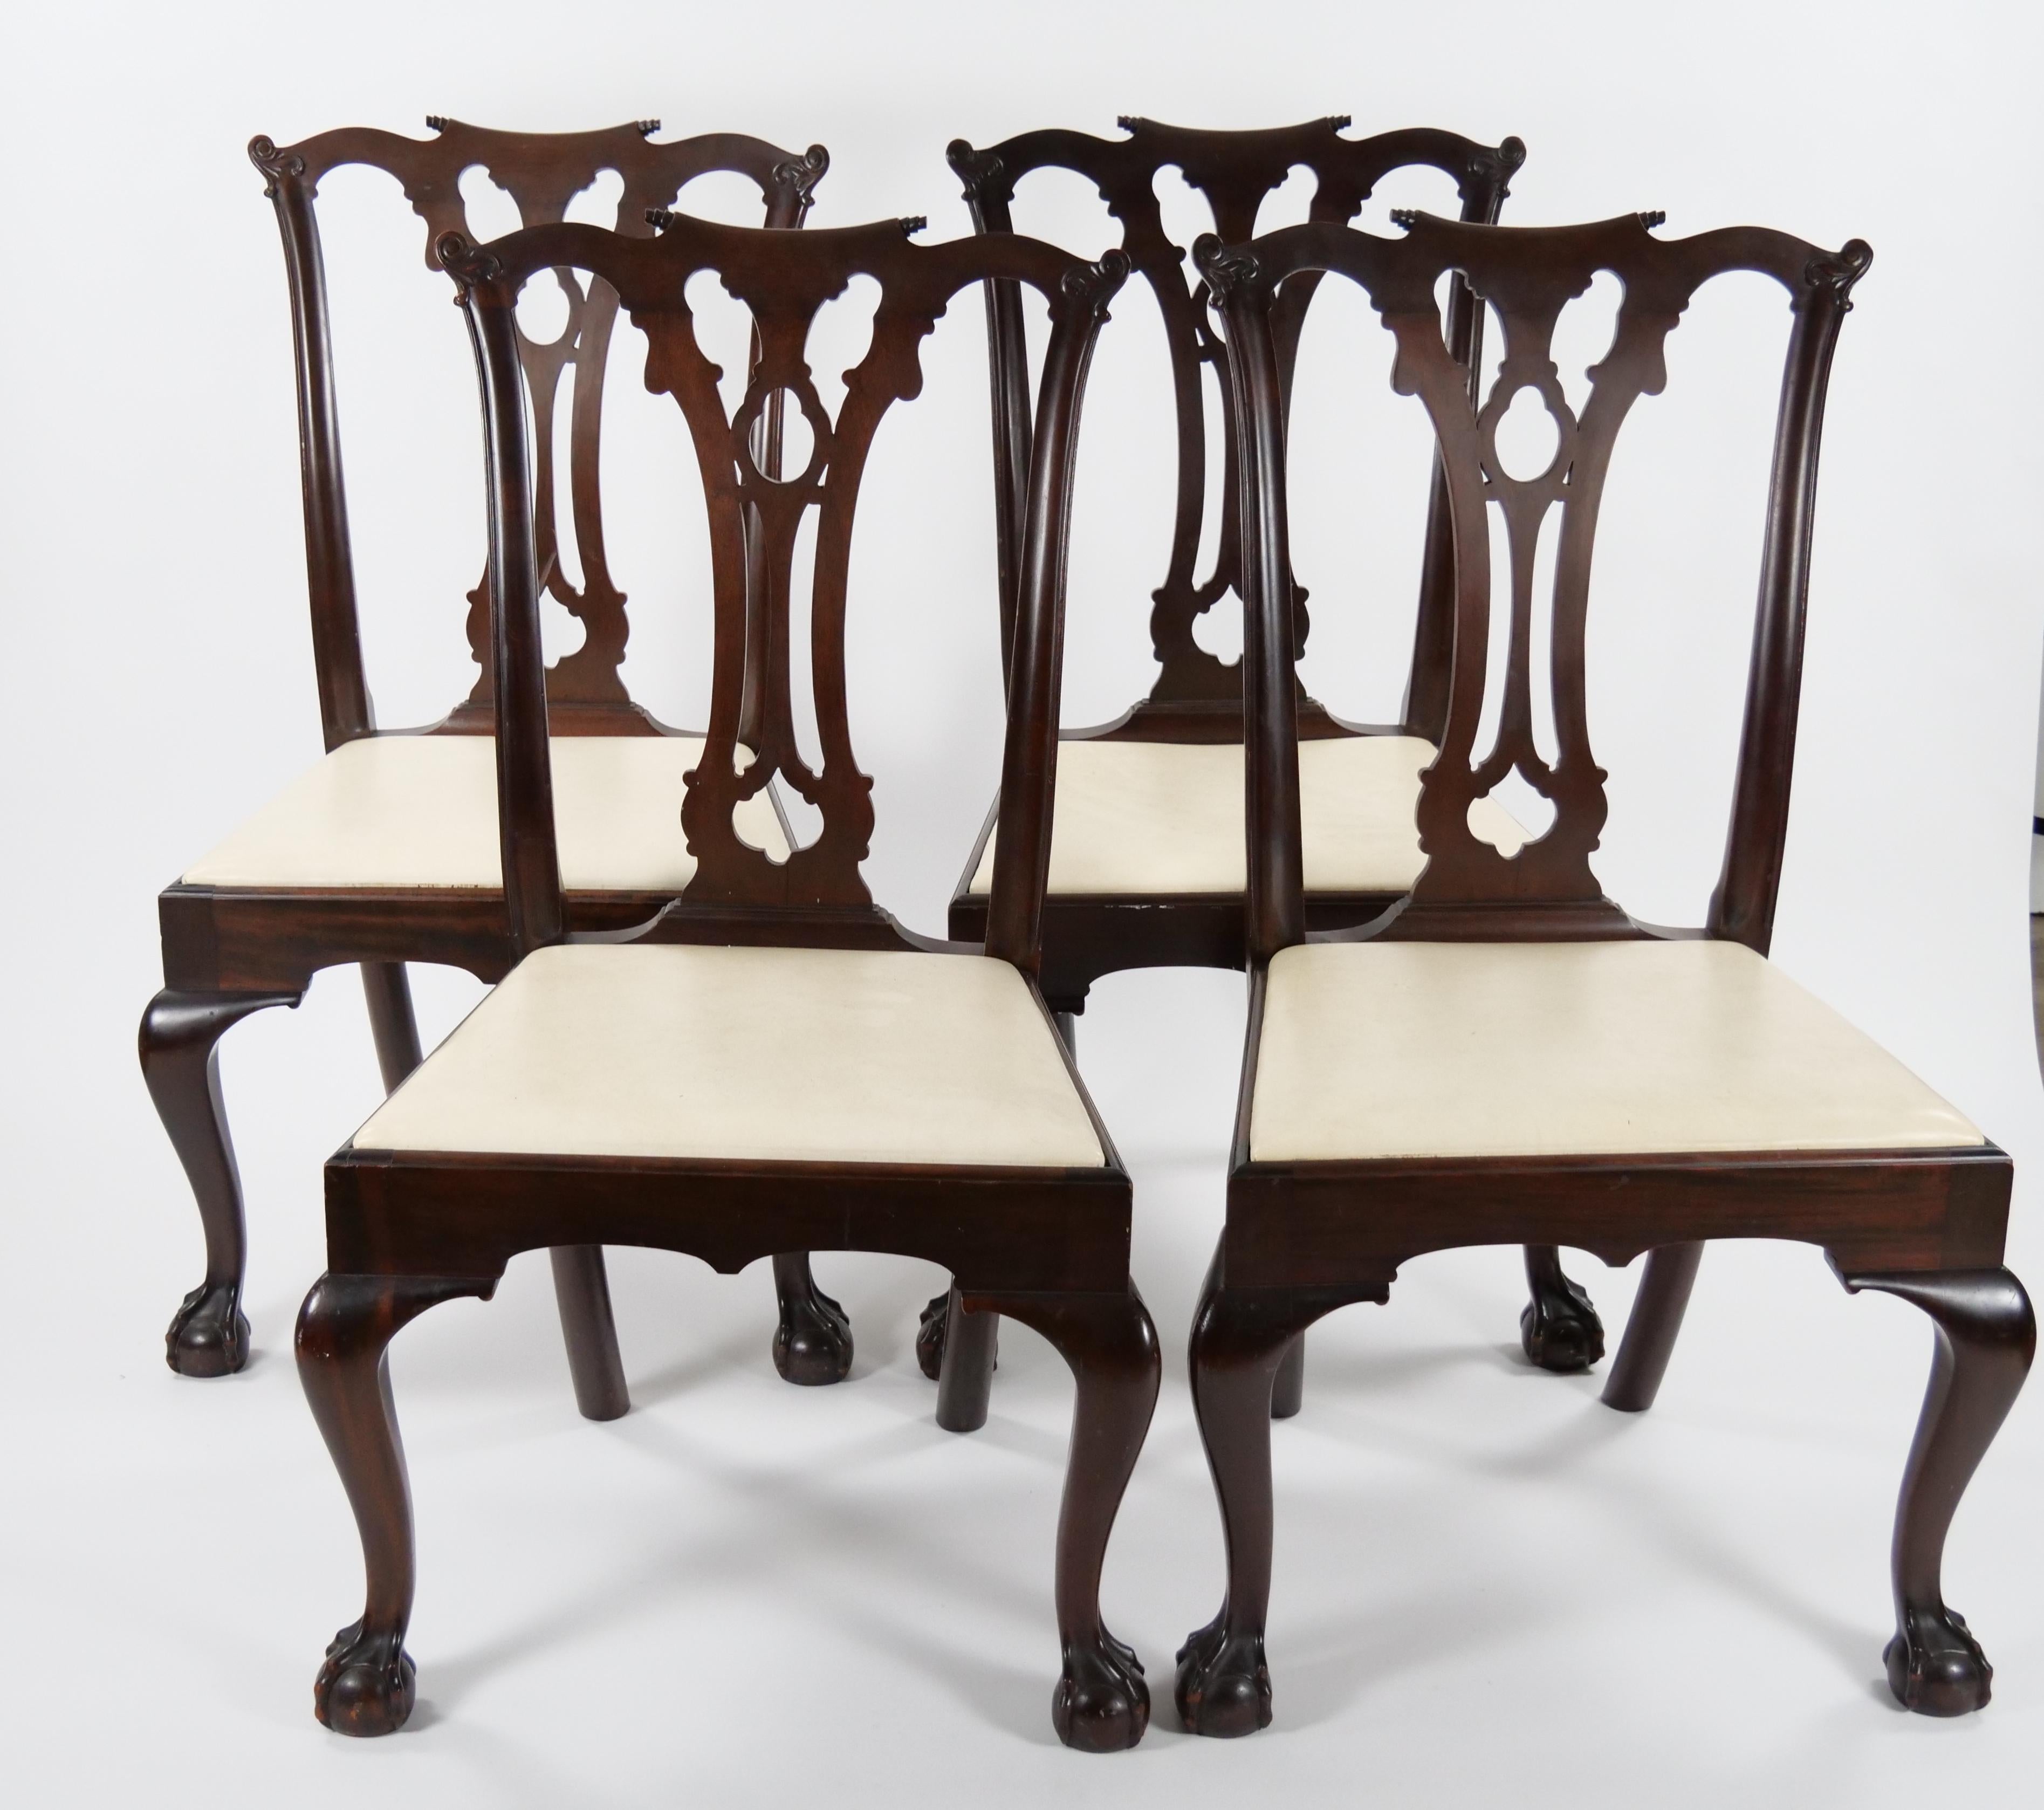 Hand-Carved Mahogany Wood Framed (8) Chippendale Style Dining Chairs For Sale